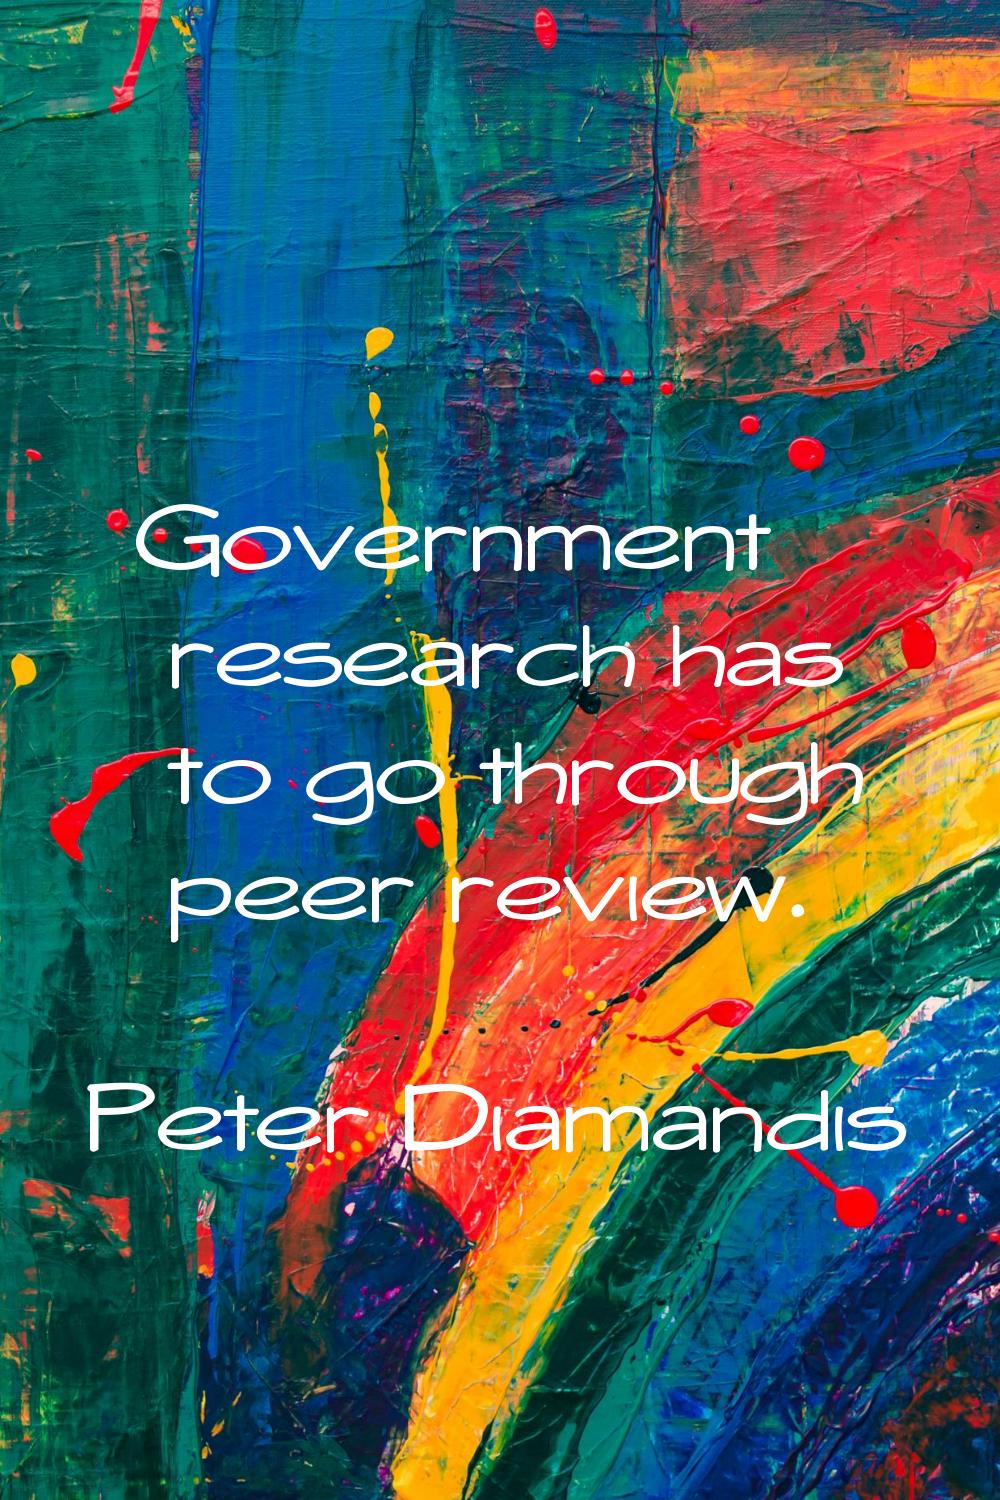 Government research has to go through peer review.